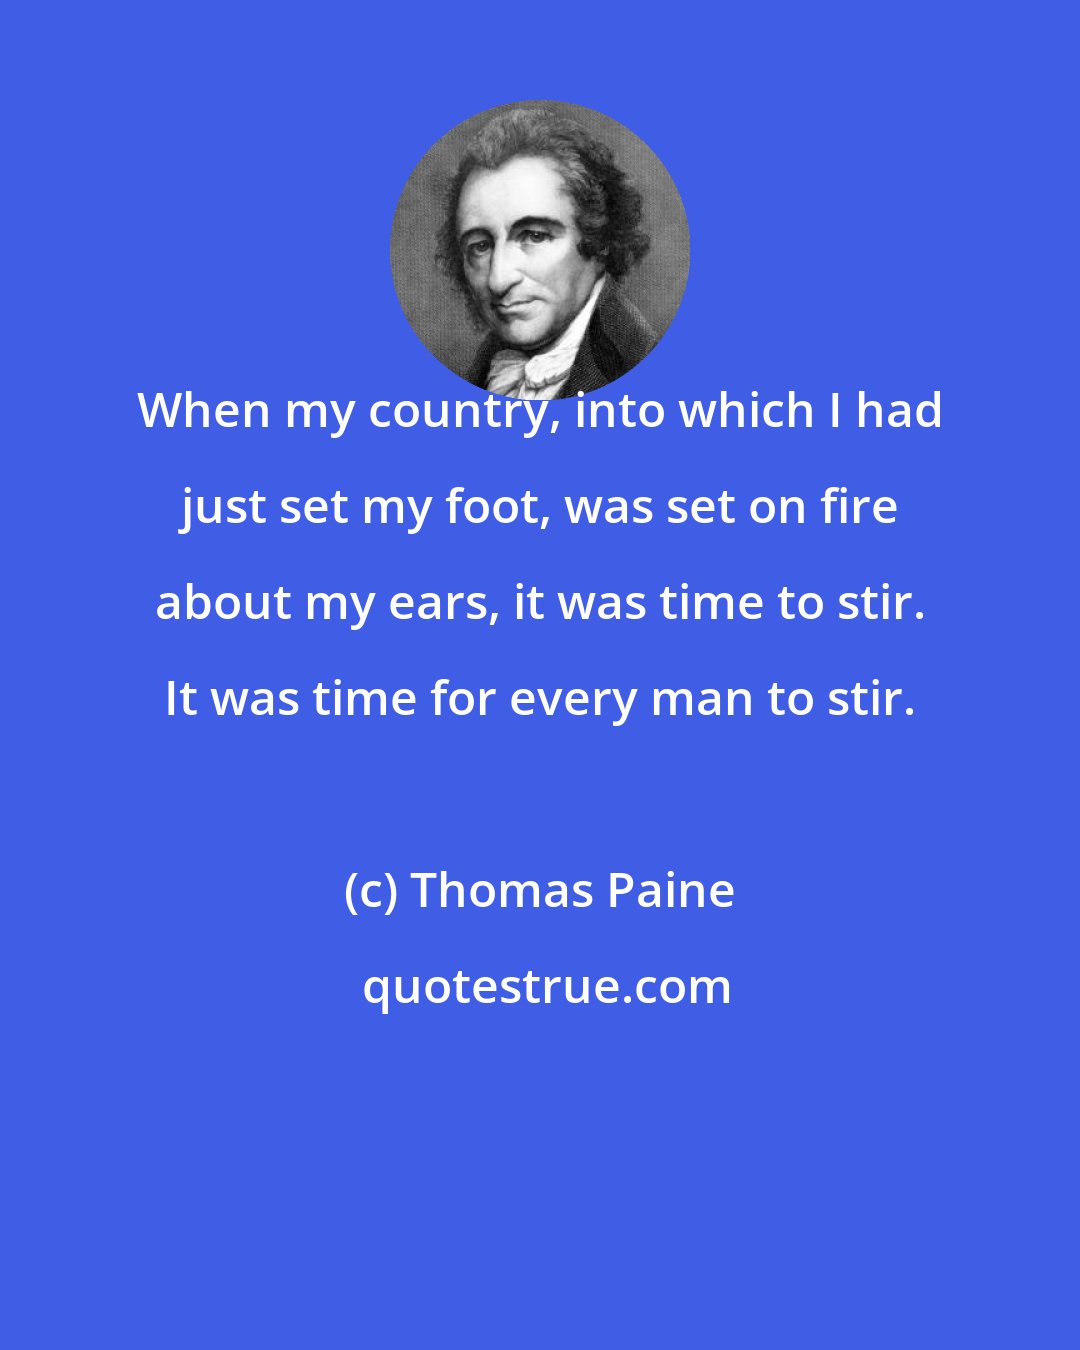 Thomas Paine: When my country, into which I had just set my foot, was set on fire about my ears, it was time to stir. It was time for every man to stir.